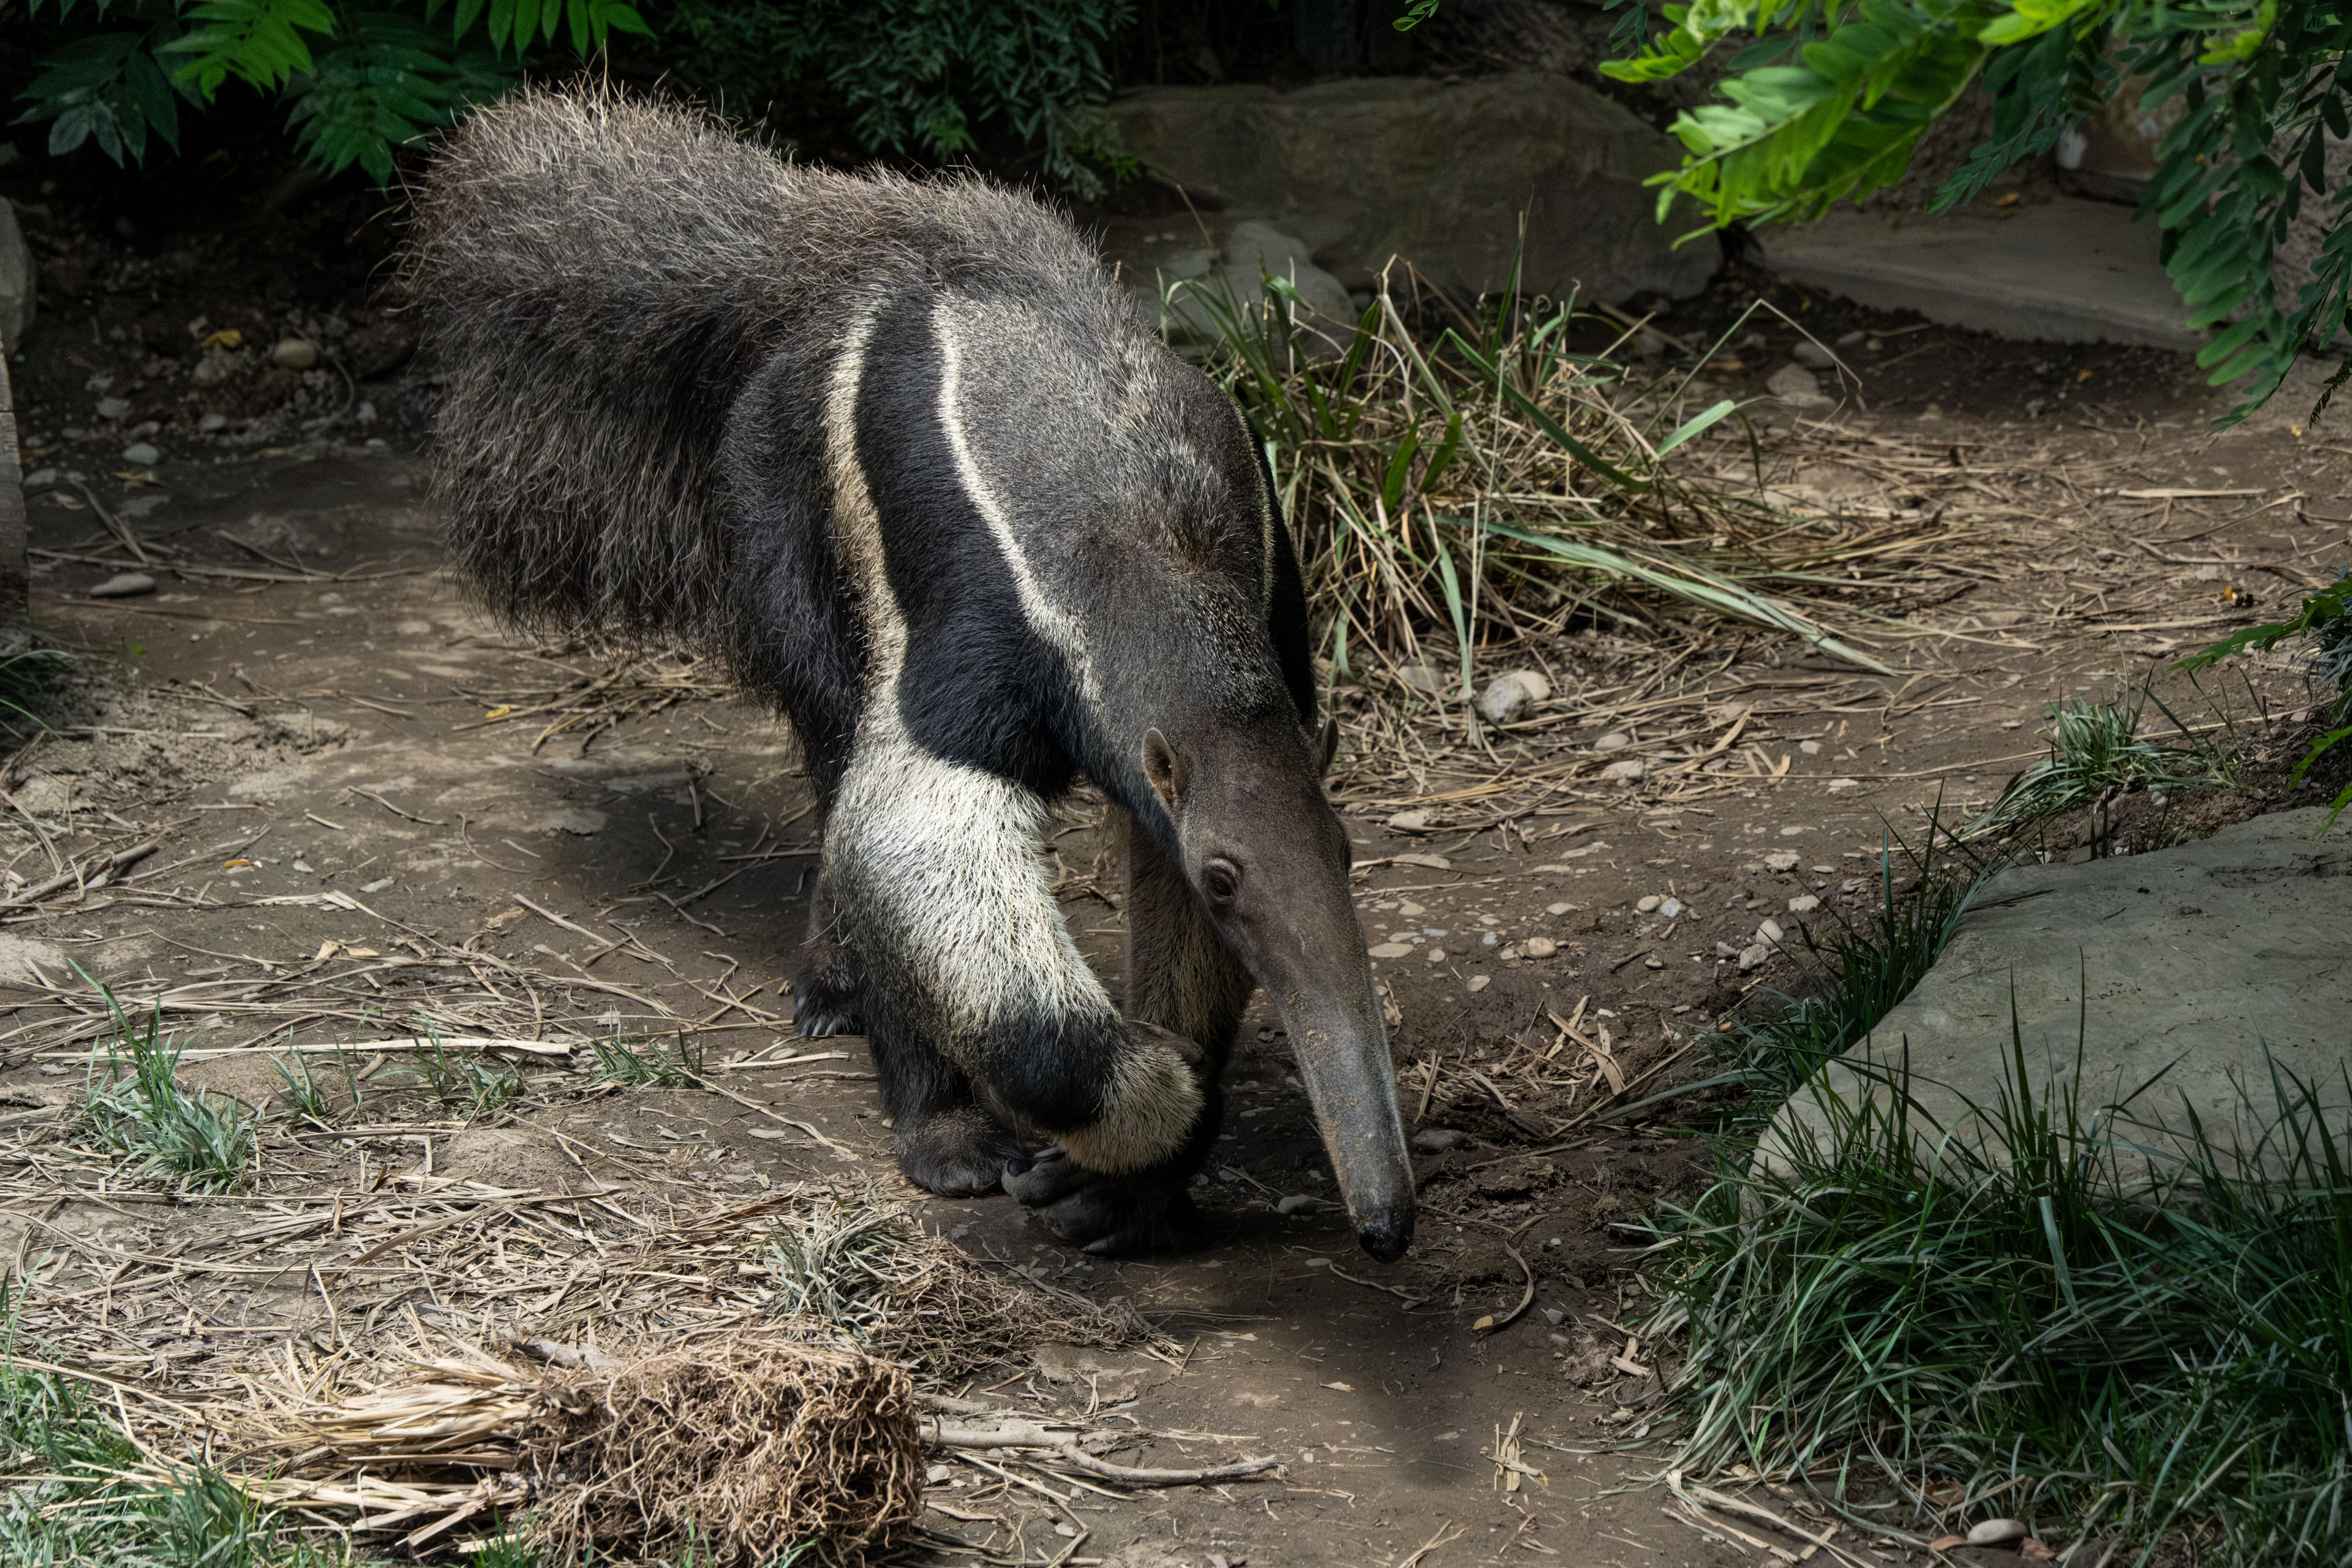 a giant anteater walking